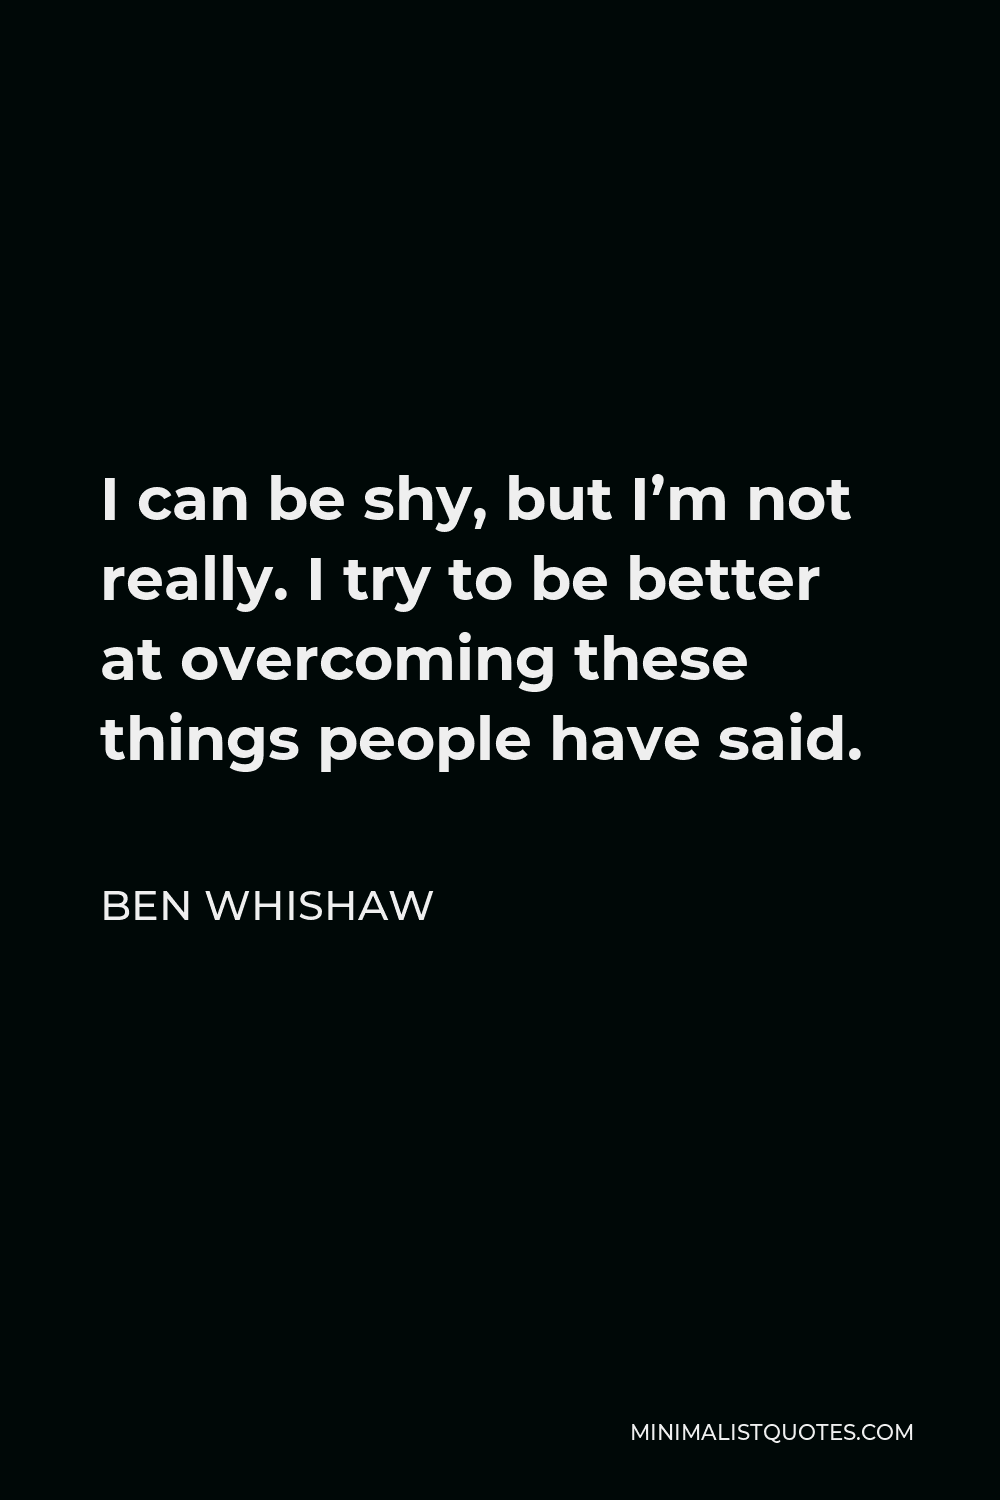 Ben Whishaw Quote - I can be shy, but I’m not really. I try to be better at overcoming these things people have said.